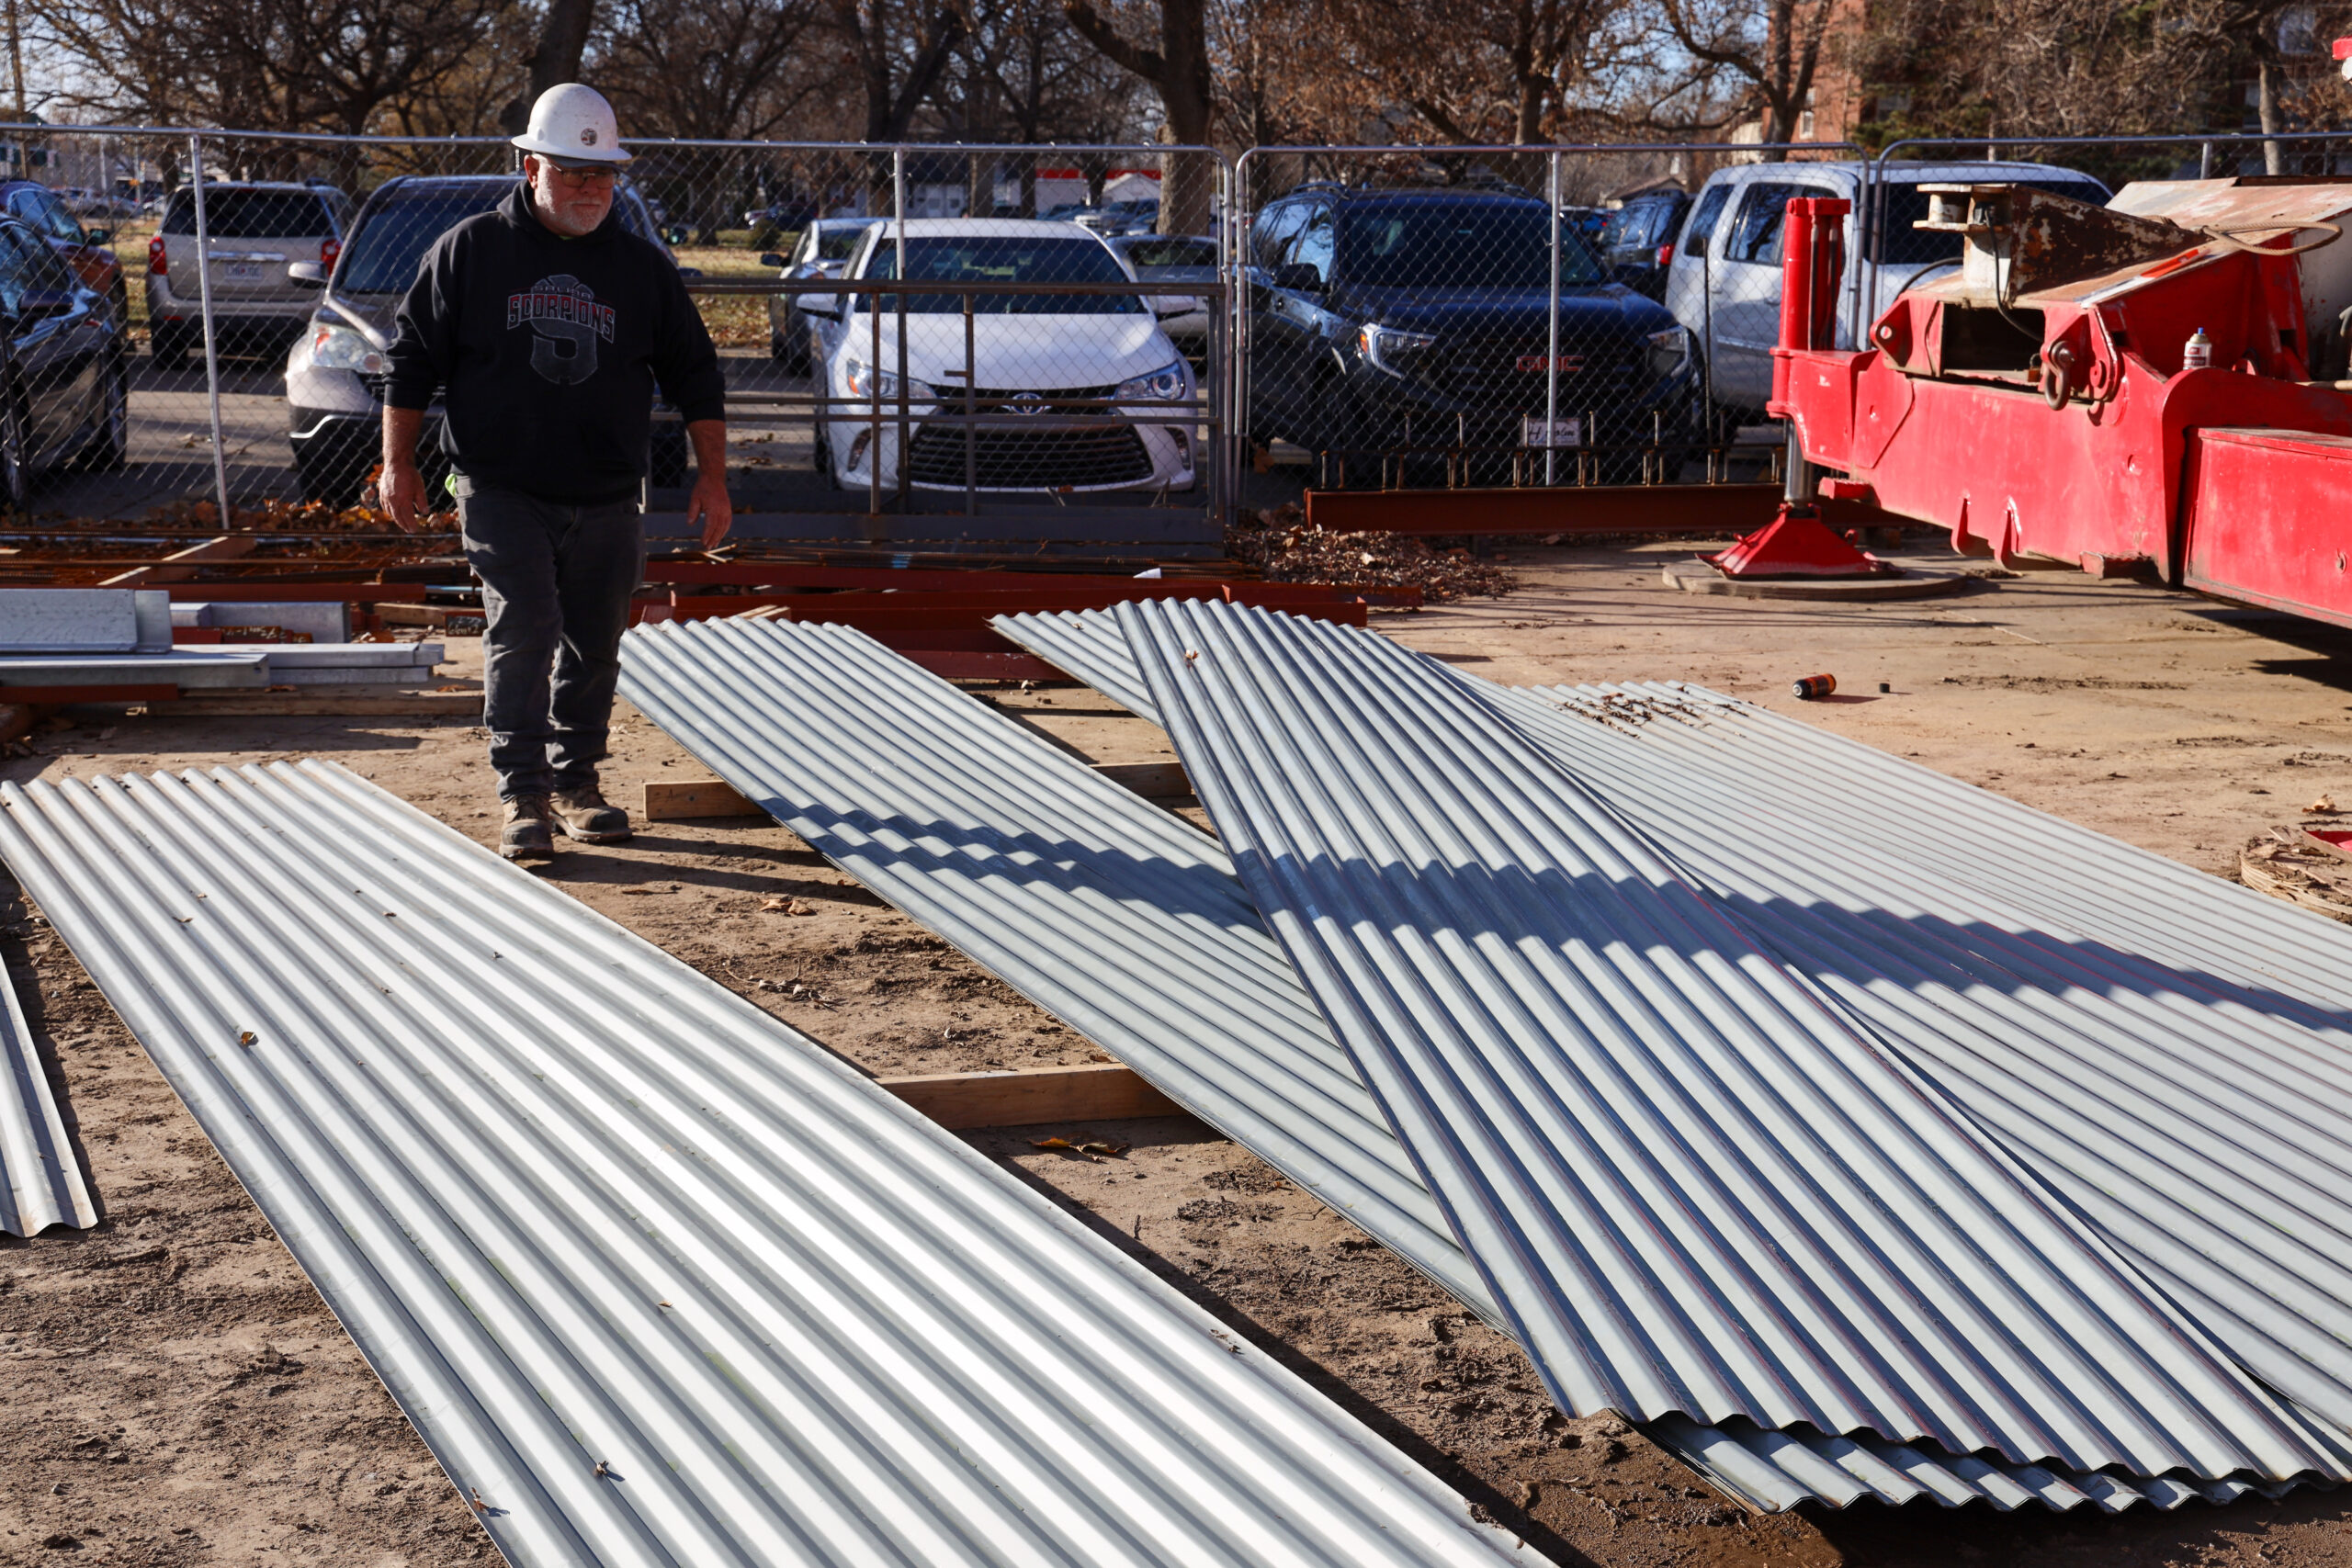 Man near Decking panels for Pioneer Hall's new entrance